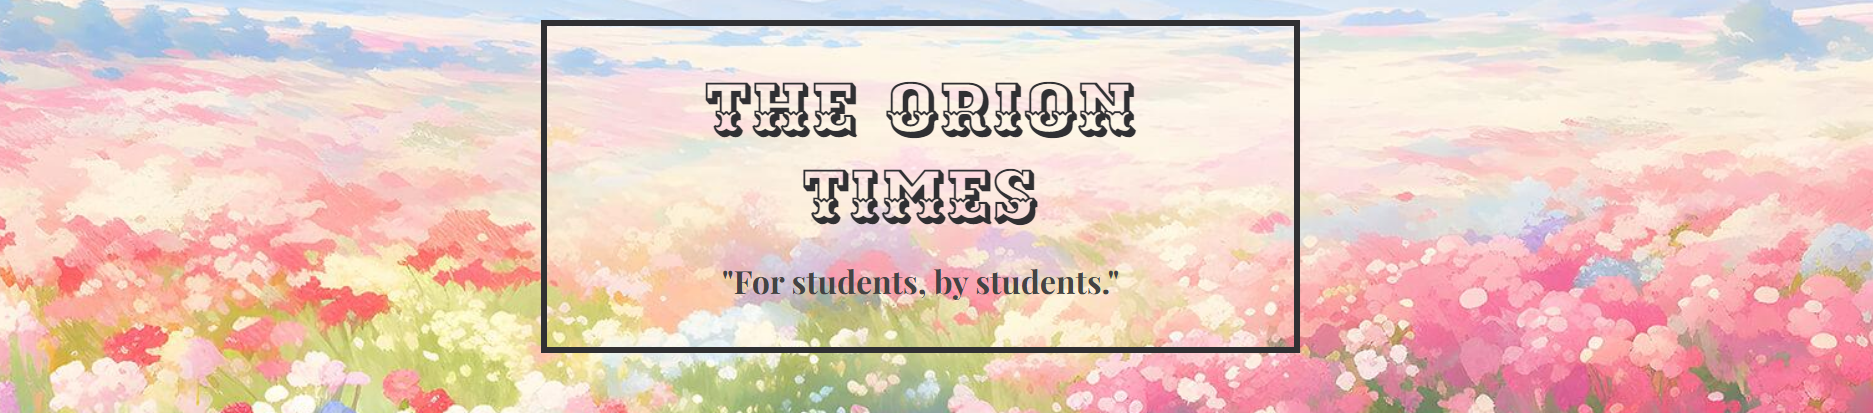 Orion Times Spring Issue